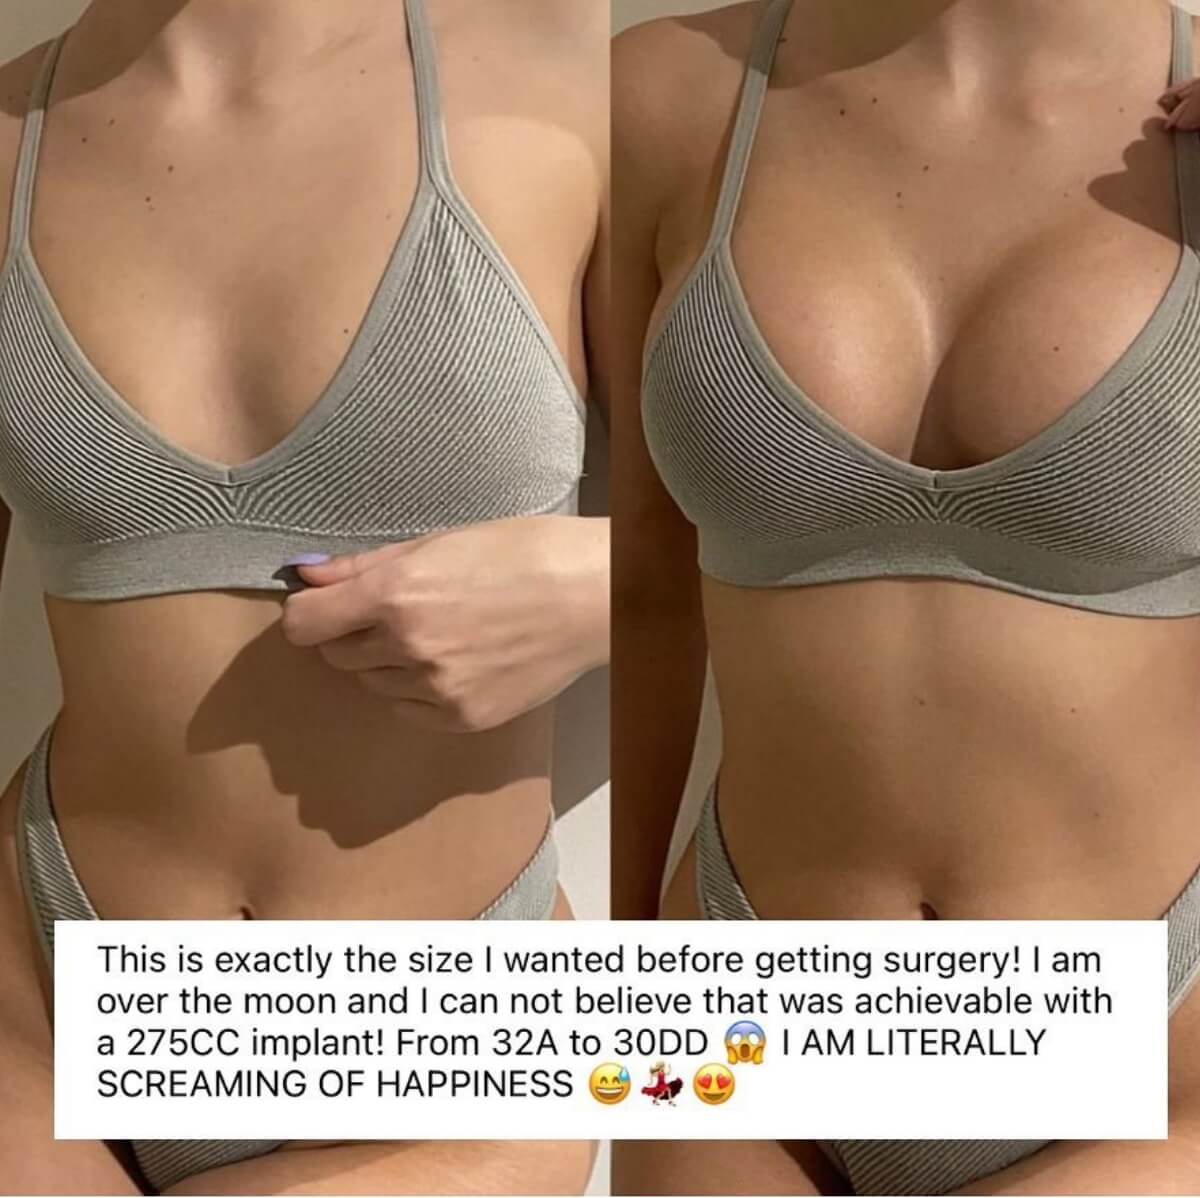 is it bad that I already have 36D size boobs and I want 1500CC to be